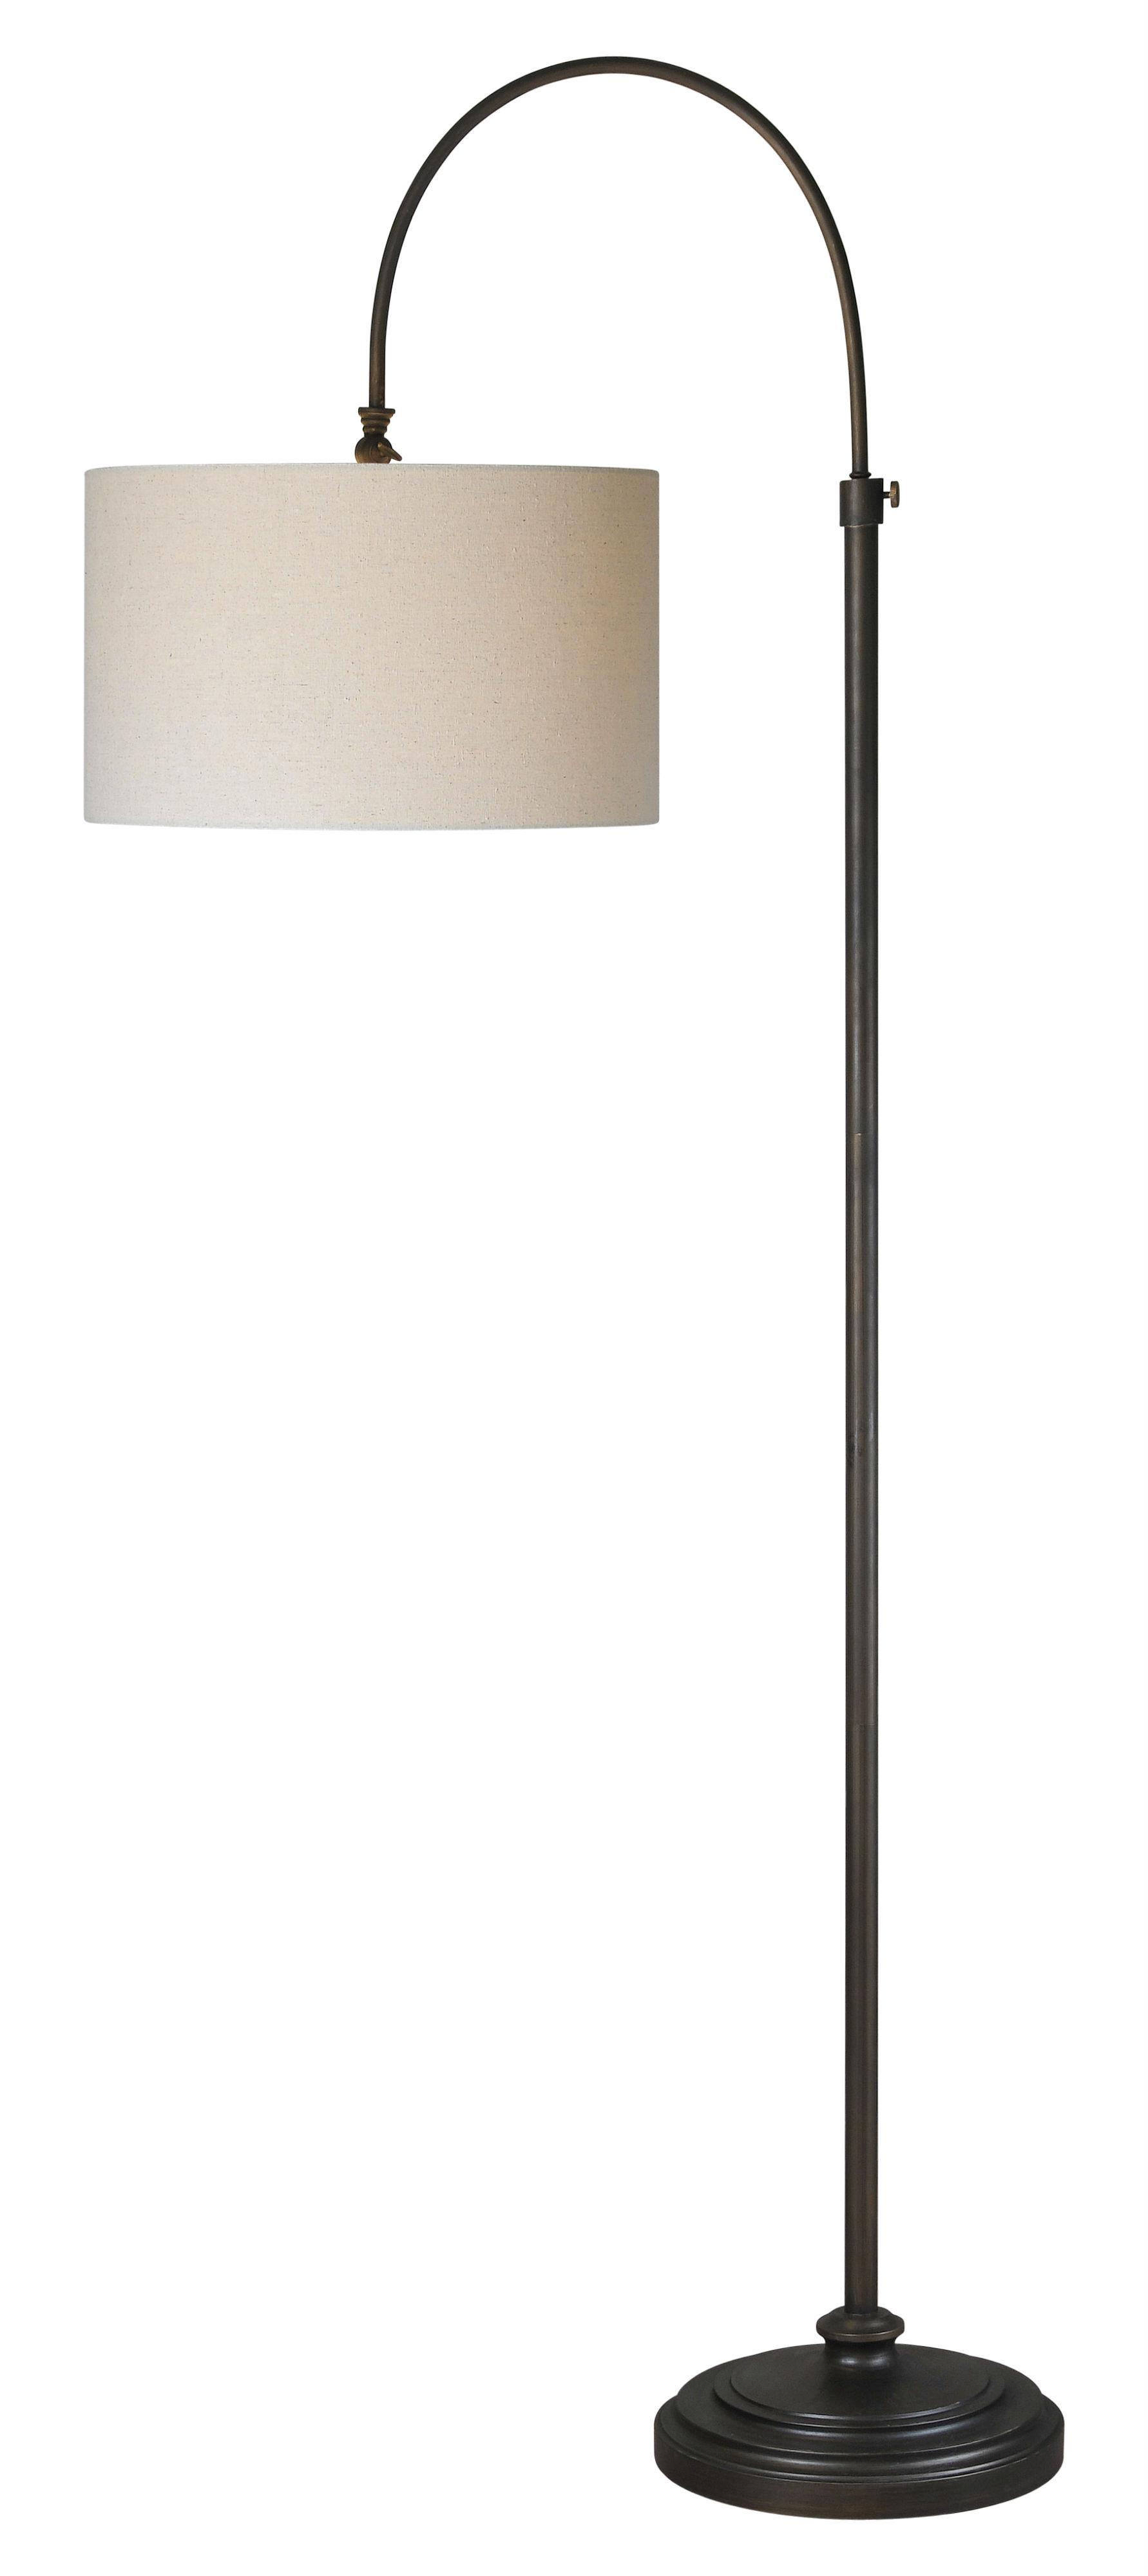 58h Forty West Reagan Floor Lamp pertaining to sizing 1782 X 4000